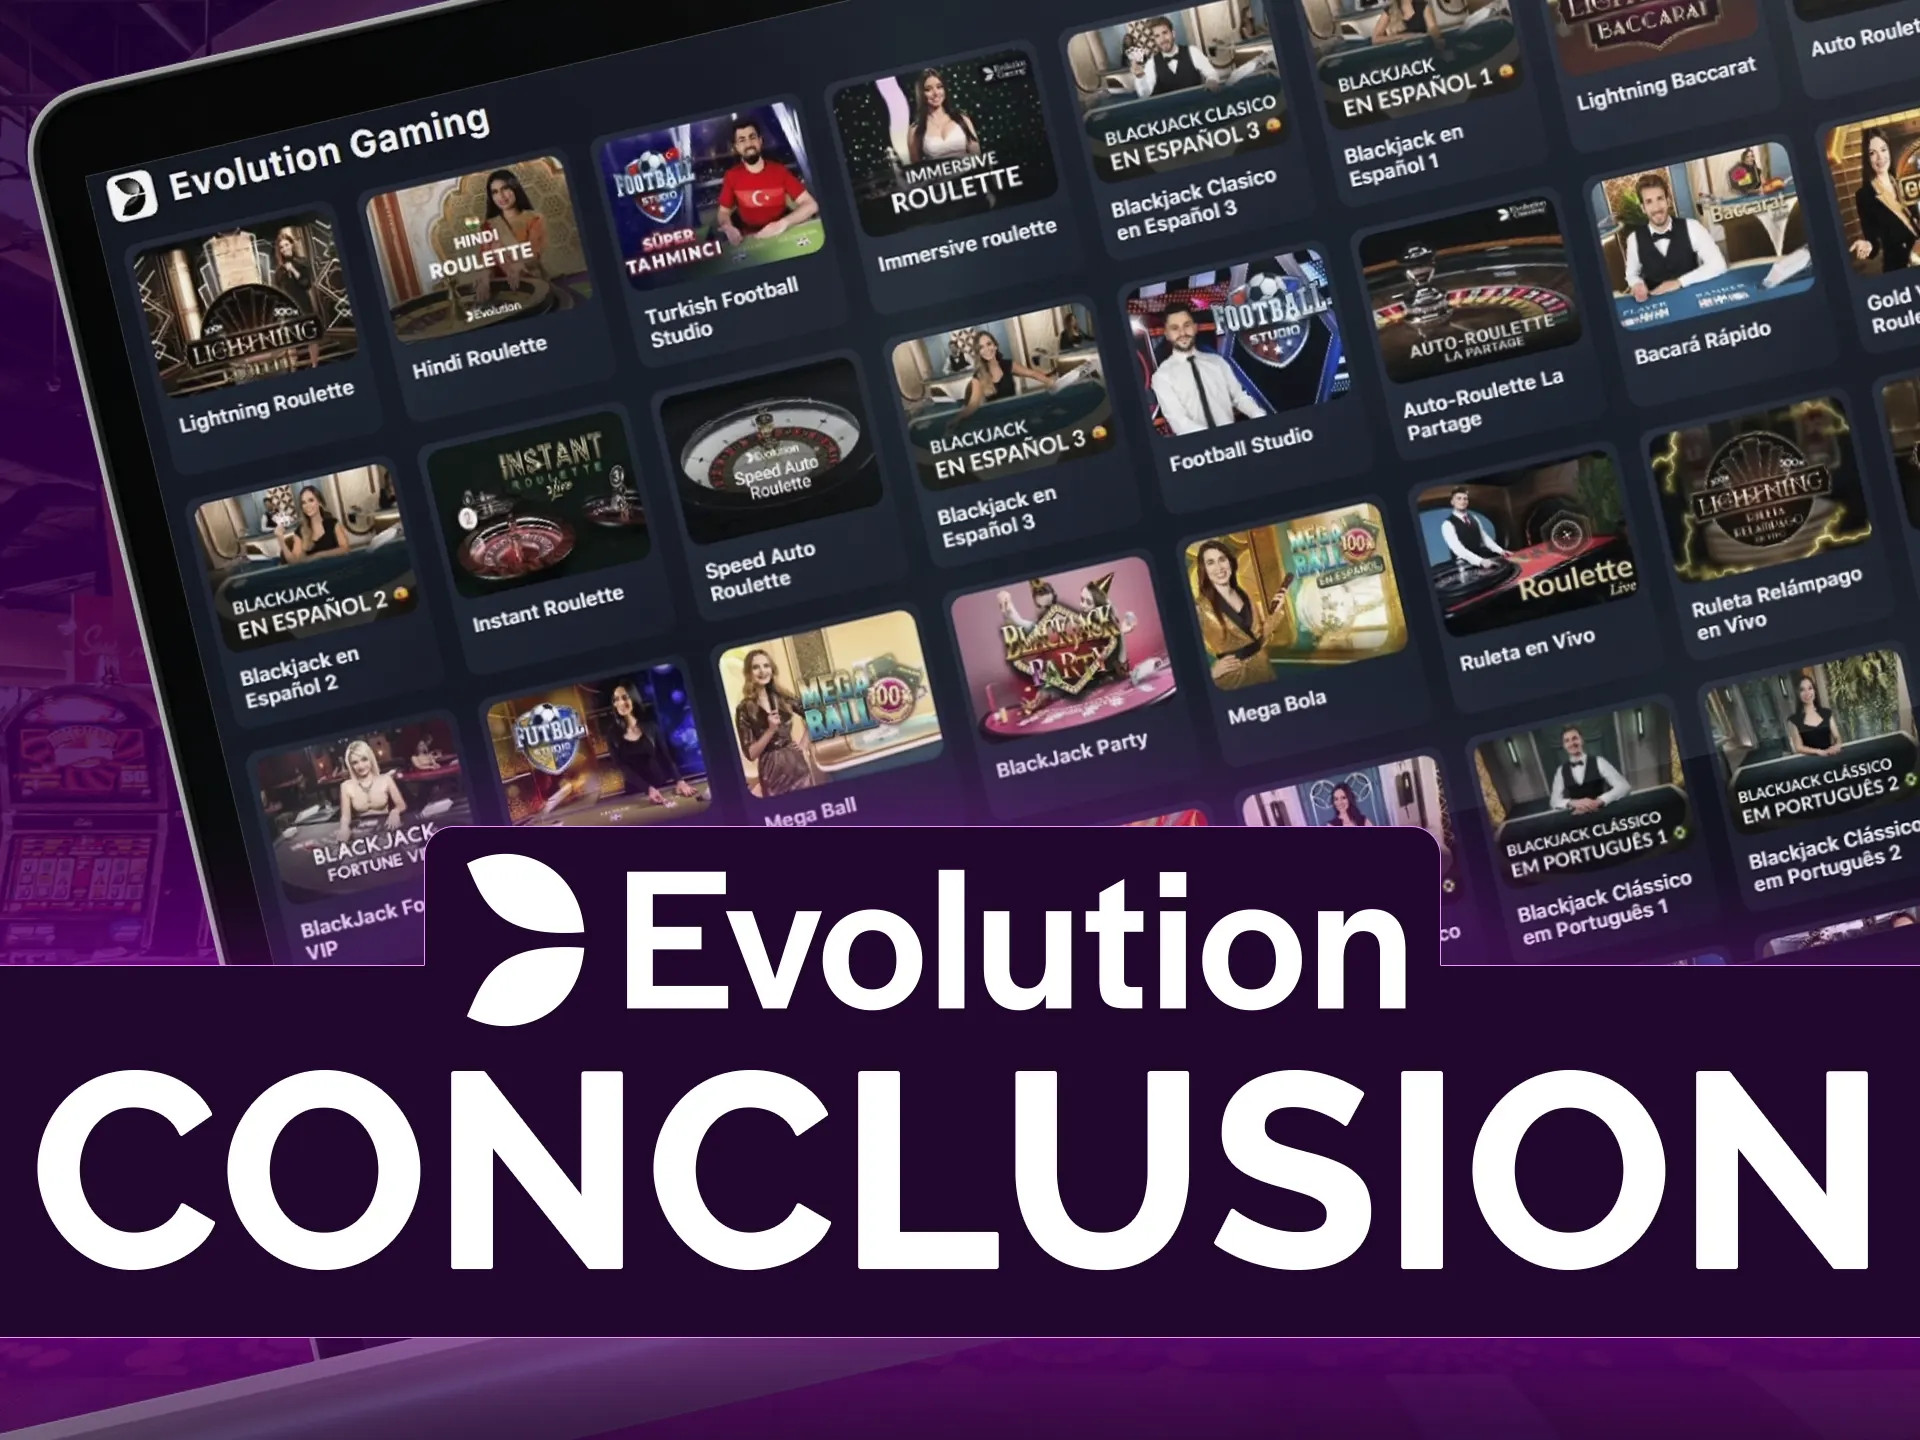 Evolution Gaming offers diverse live dealer games and mobile-friendly table games.